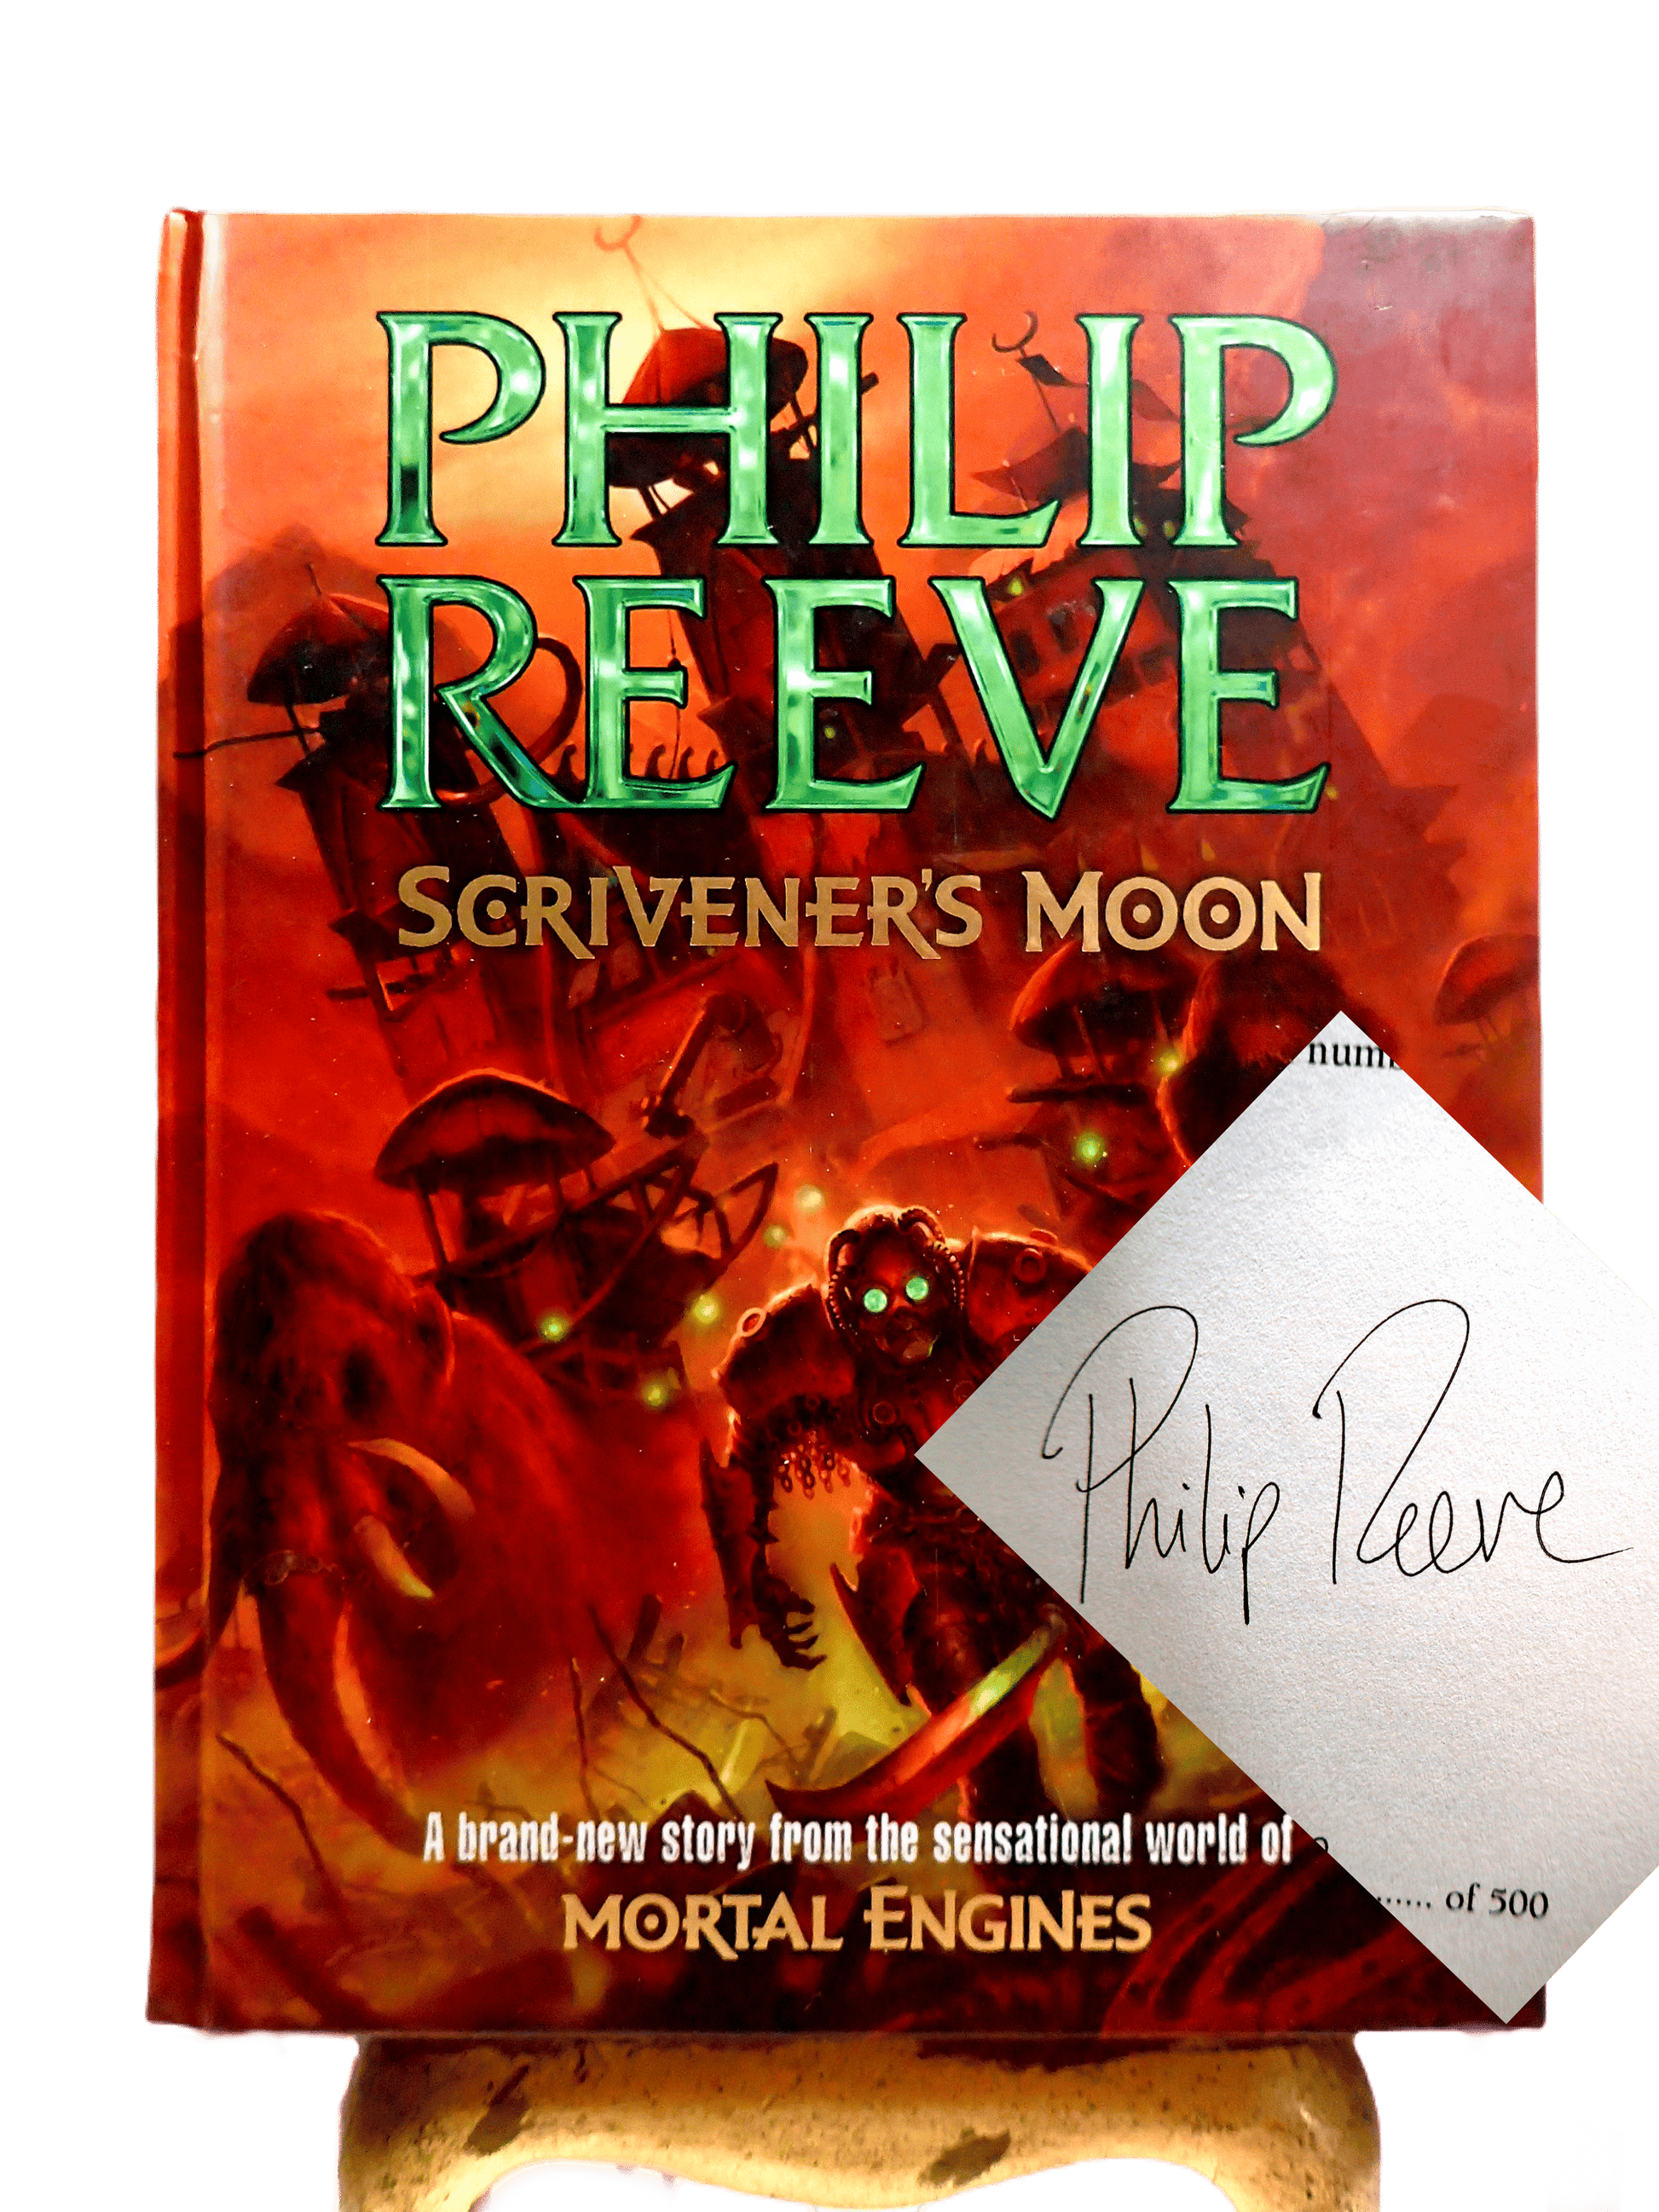 Front cover of ScrivenerFirst Edition Mortal Engines Sci Fi showing signature of Philip Reeve Ltd Ed 500 